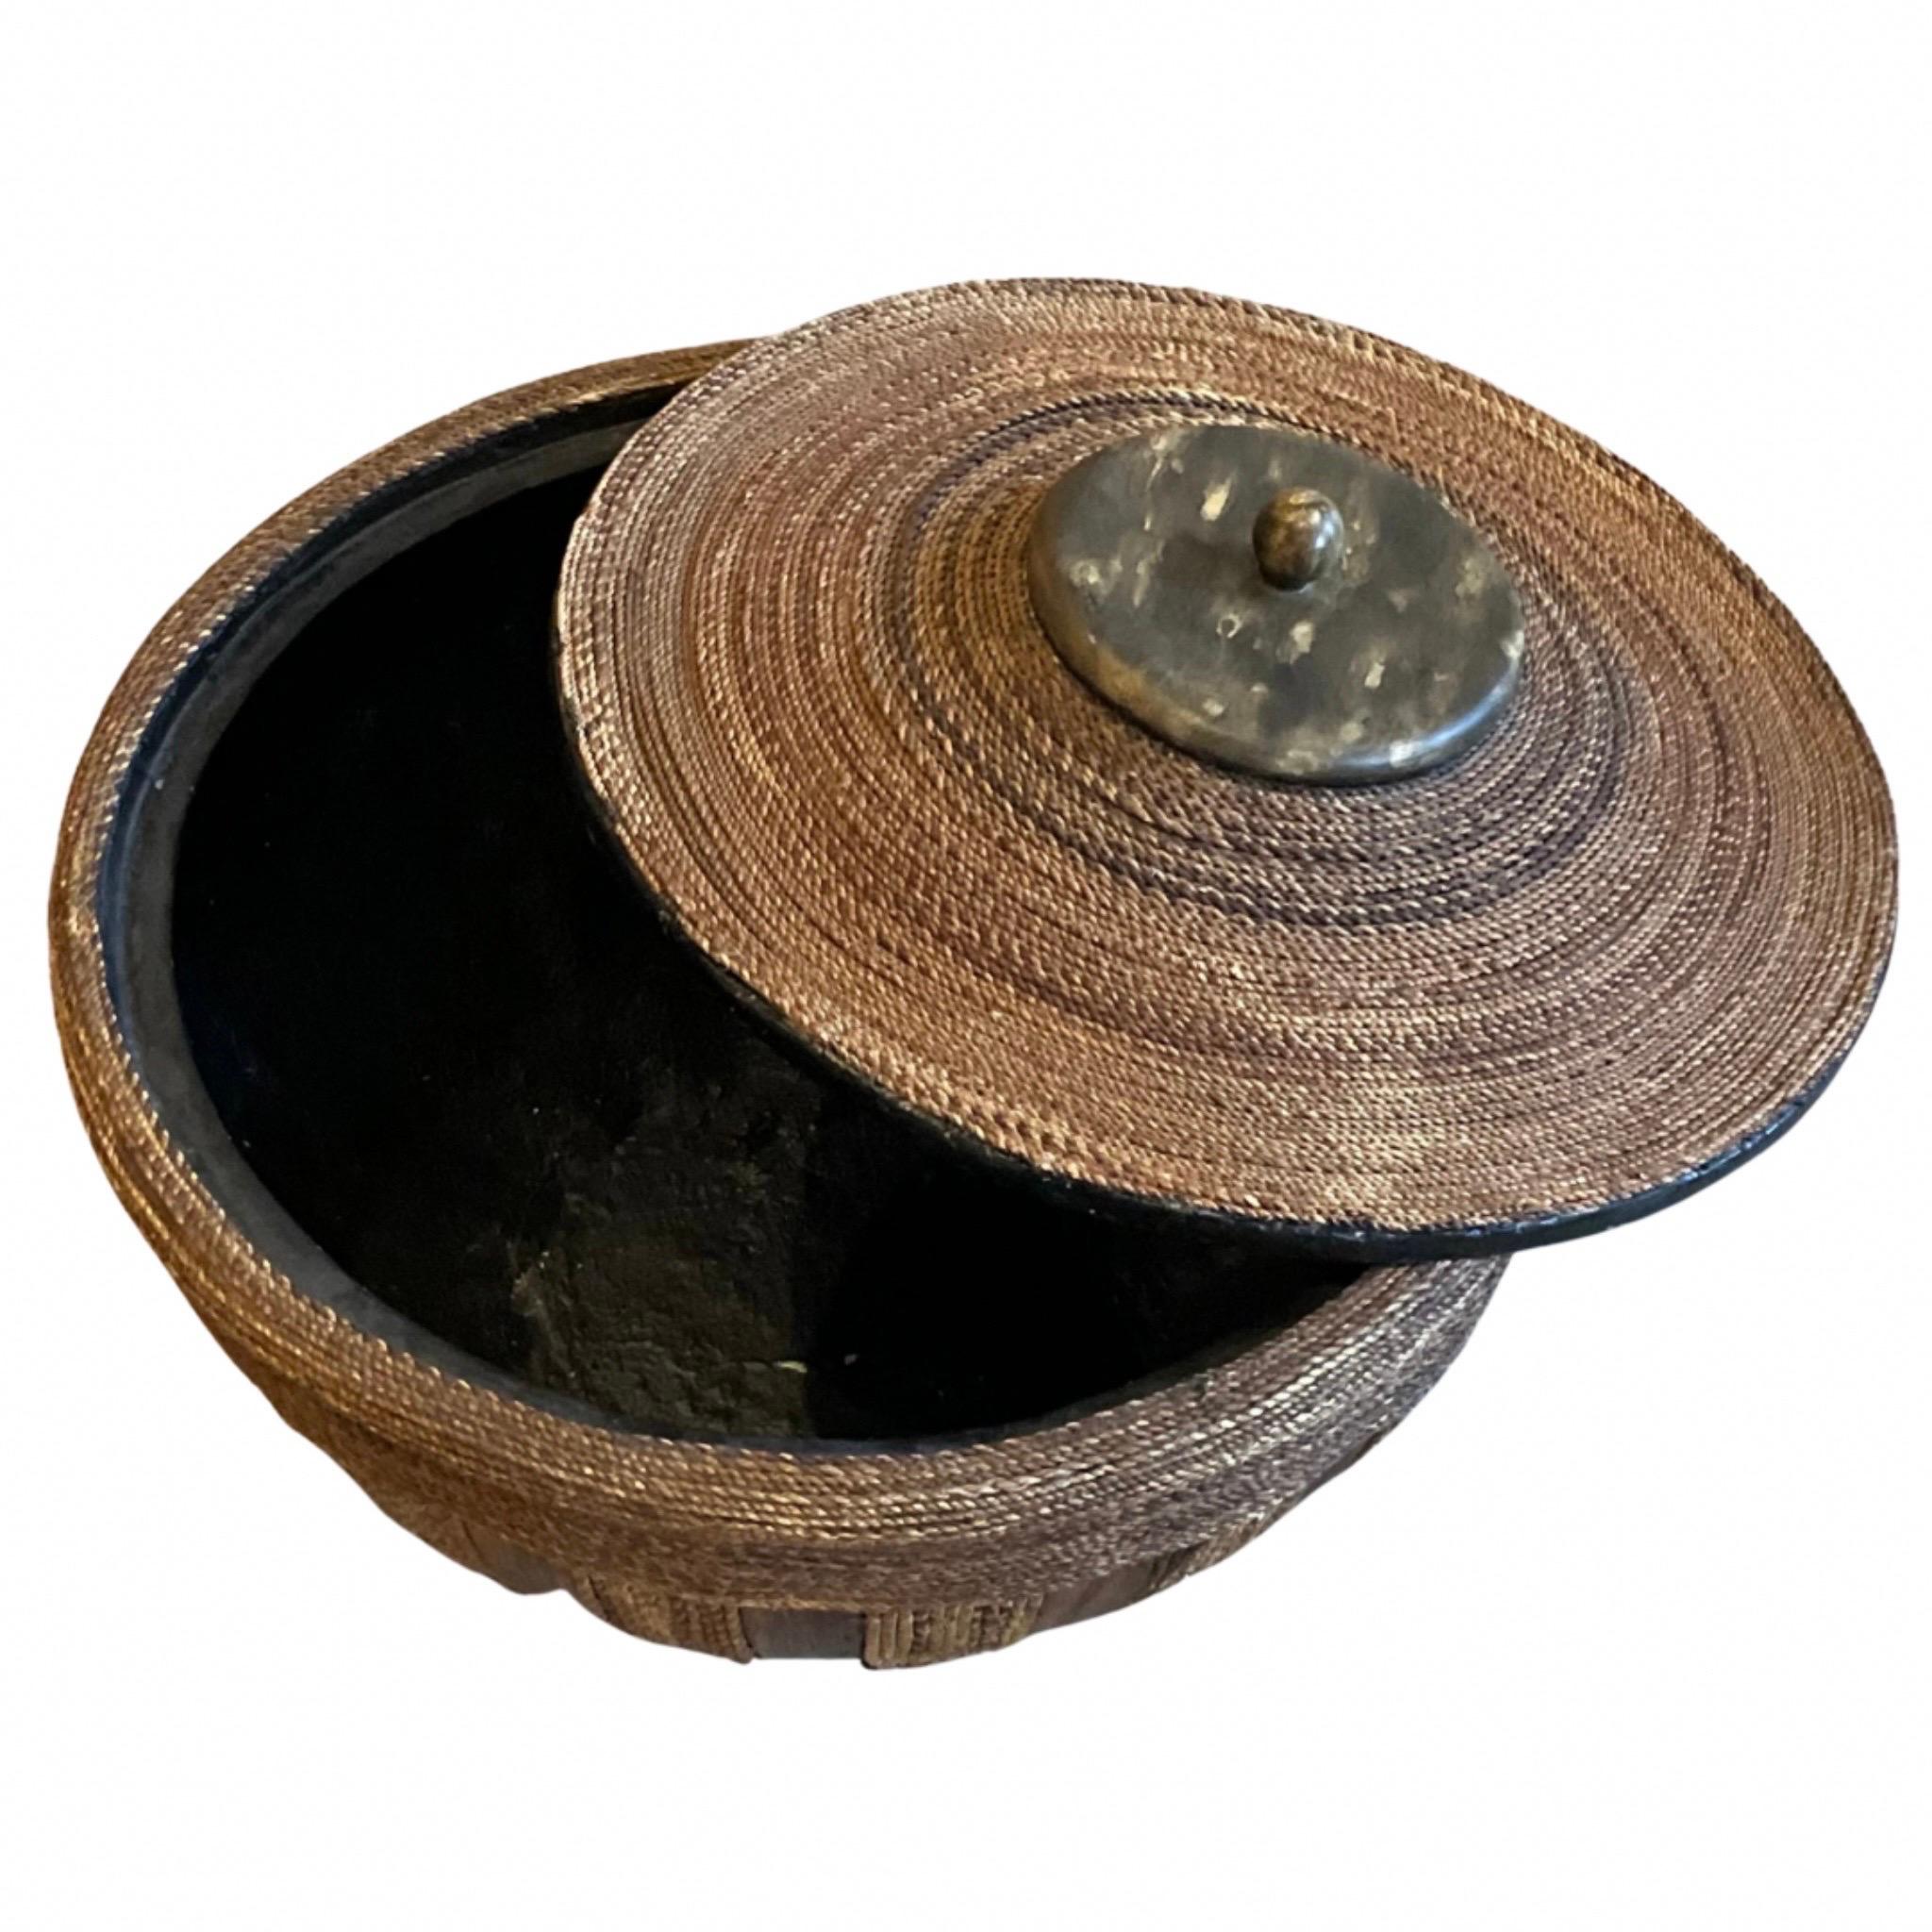 Beautiful natural woven fiber basket, bowl, container with lid

Curved wood strips accent on the sides

Resin lid with ball handle

Black fiberglass lining.